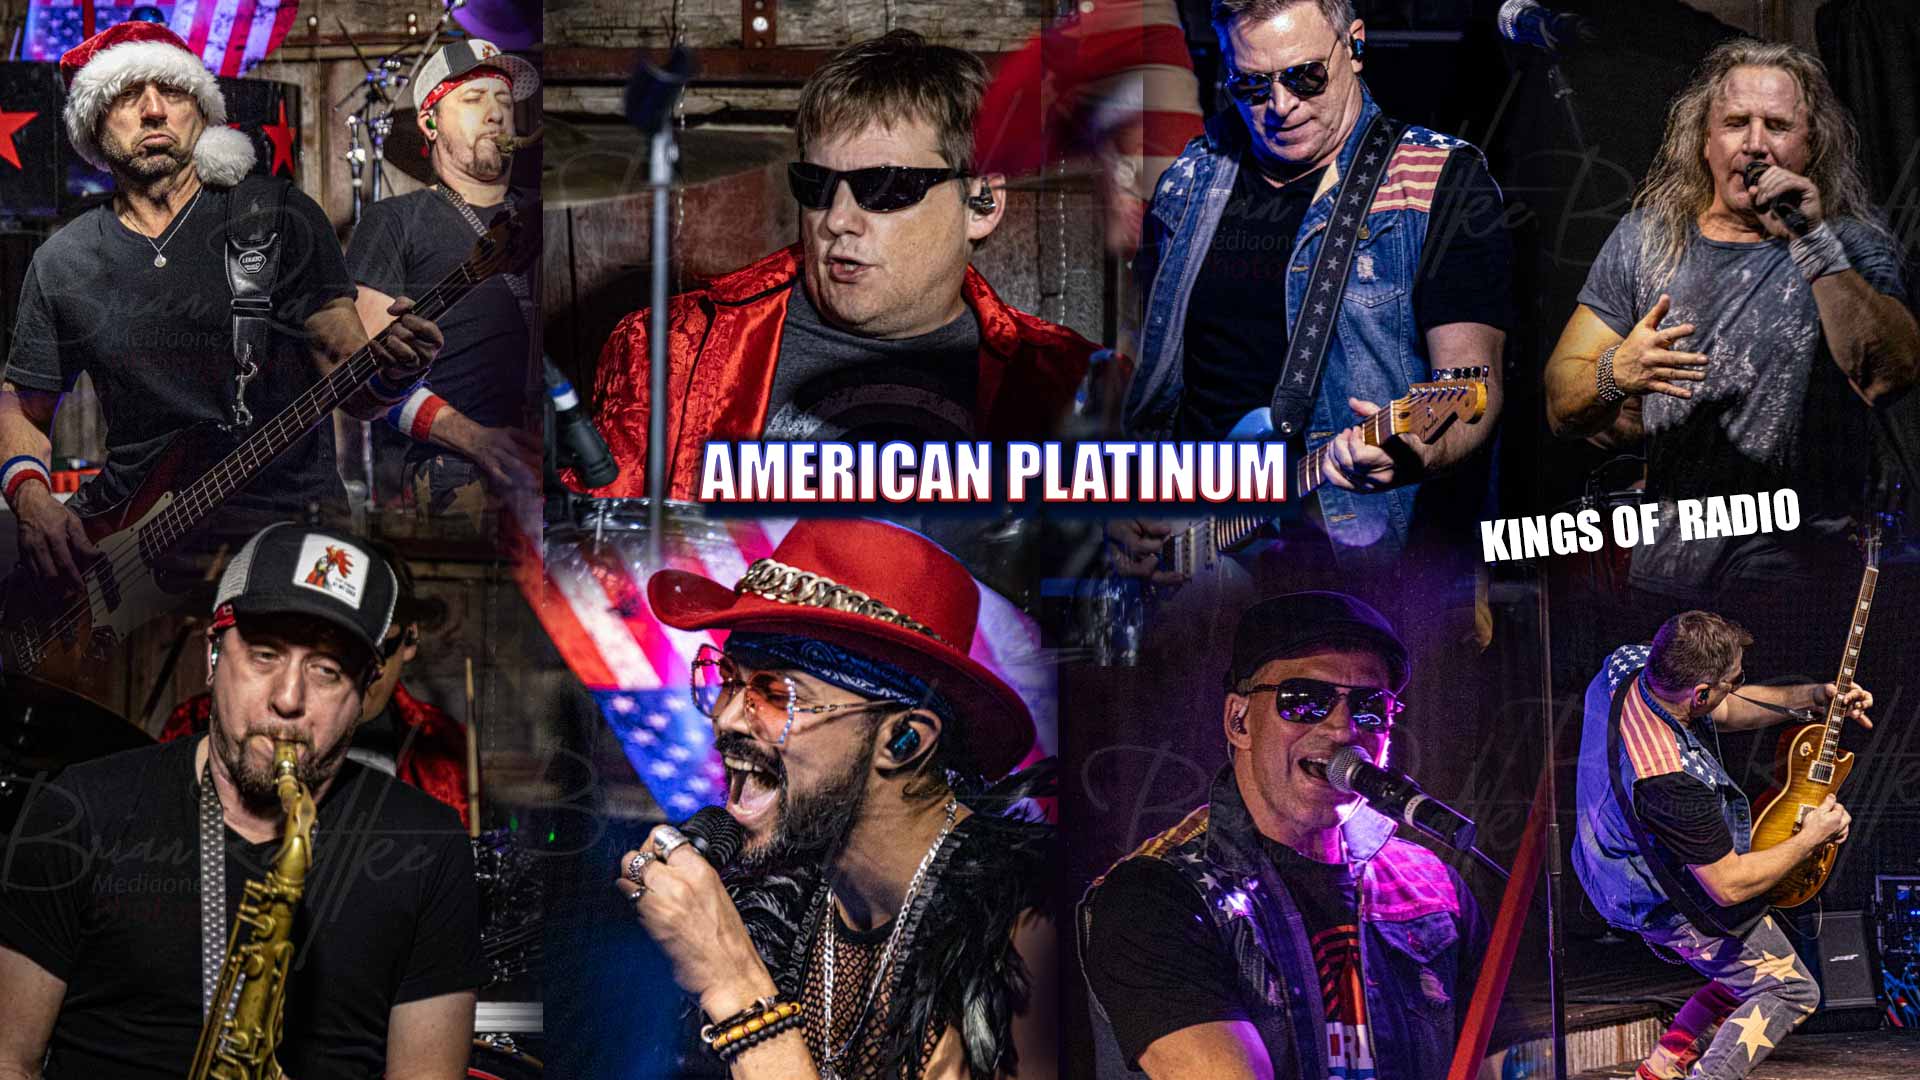 American Platinum and Kings of Radio Bands Live in Fox Valley Wisconsin